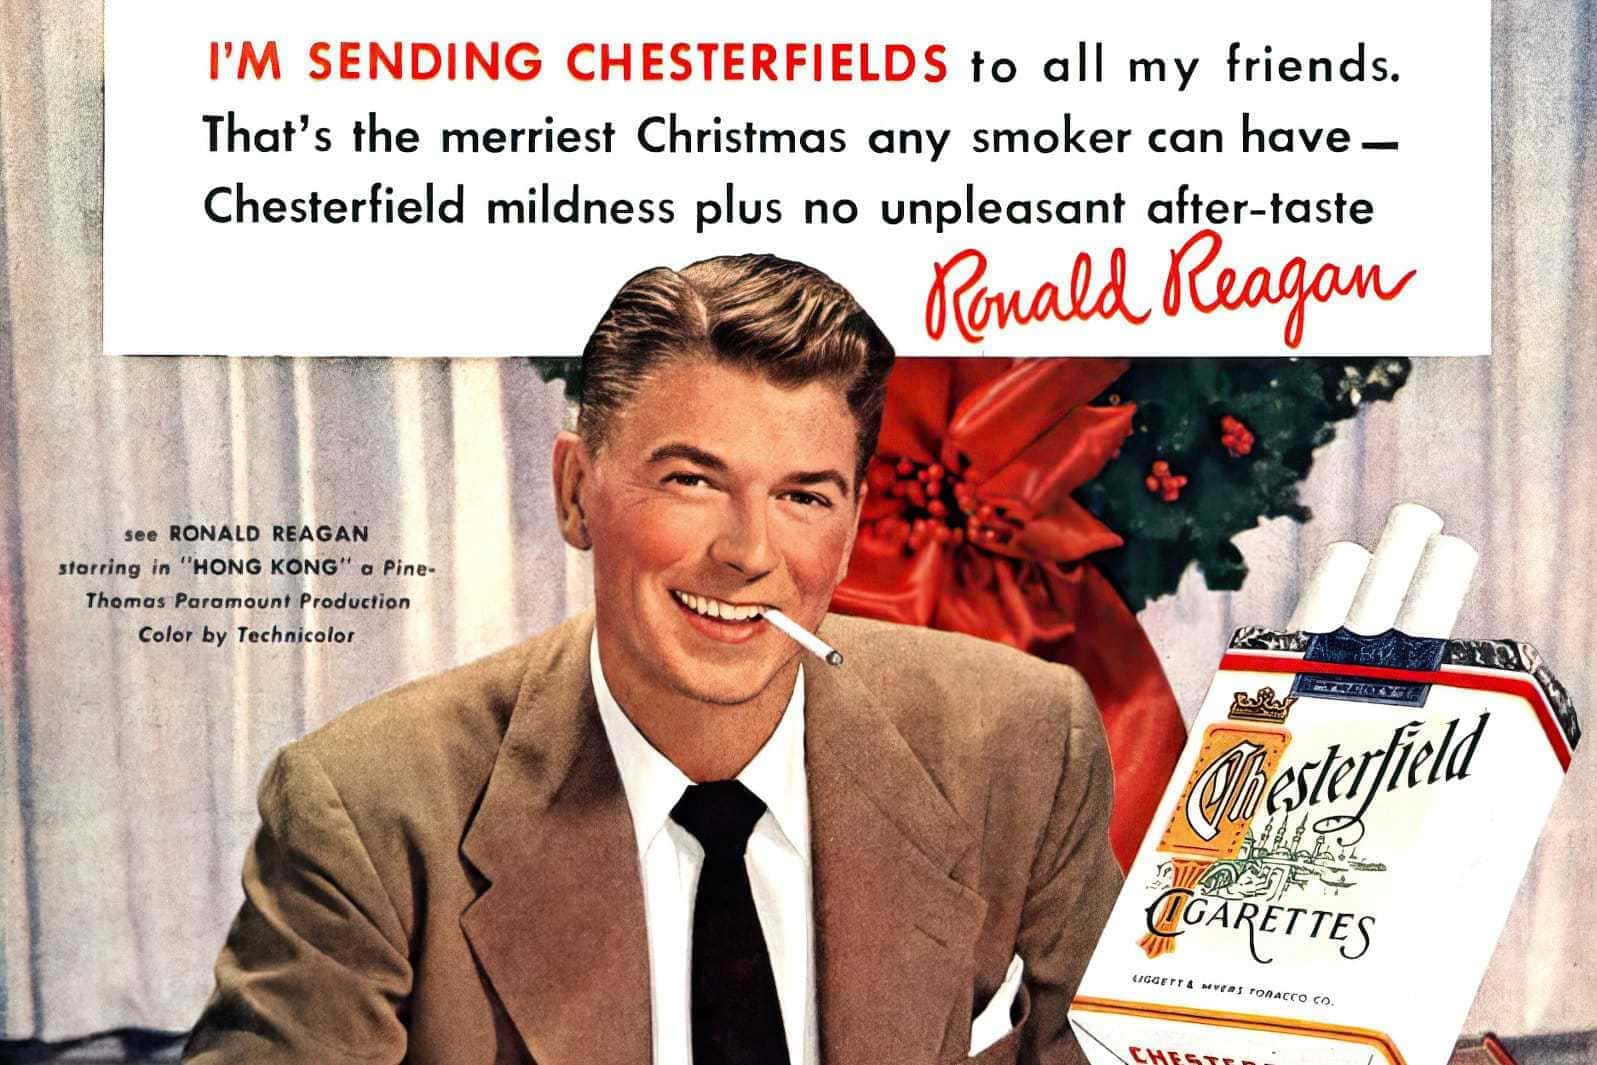 See-the-vintage-celebrities-who-used-to-advertise-cigarettes-Ron-Reagan-1950s[1].jpg